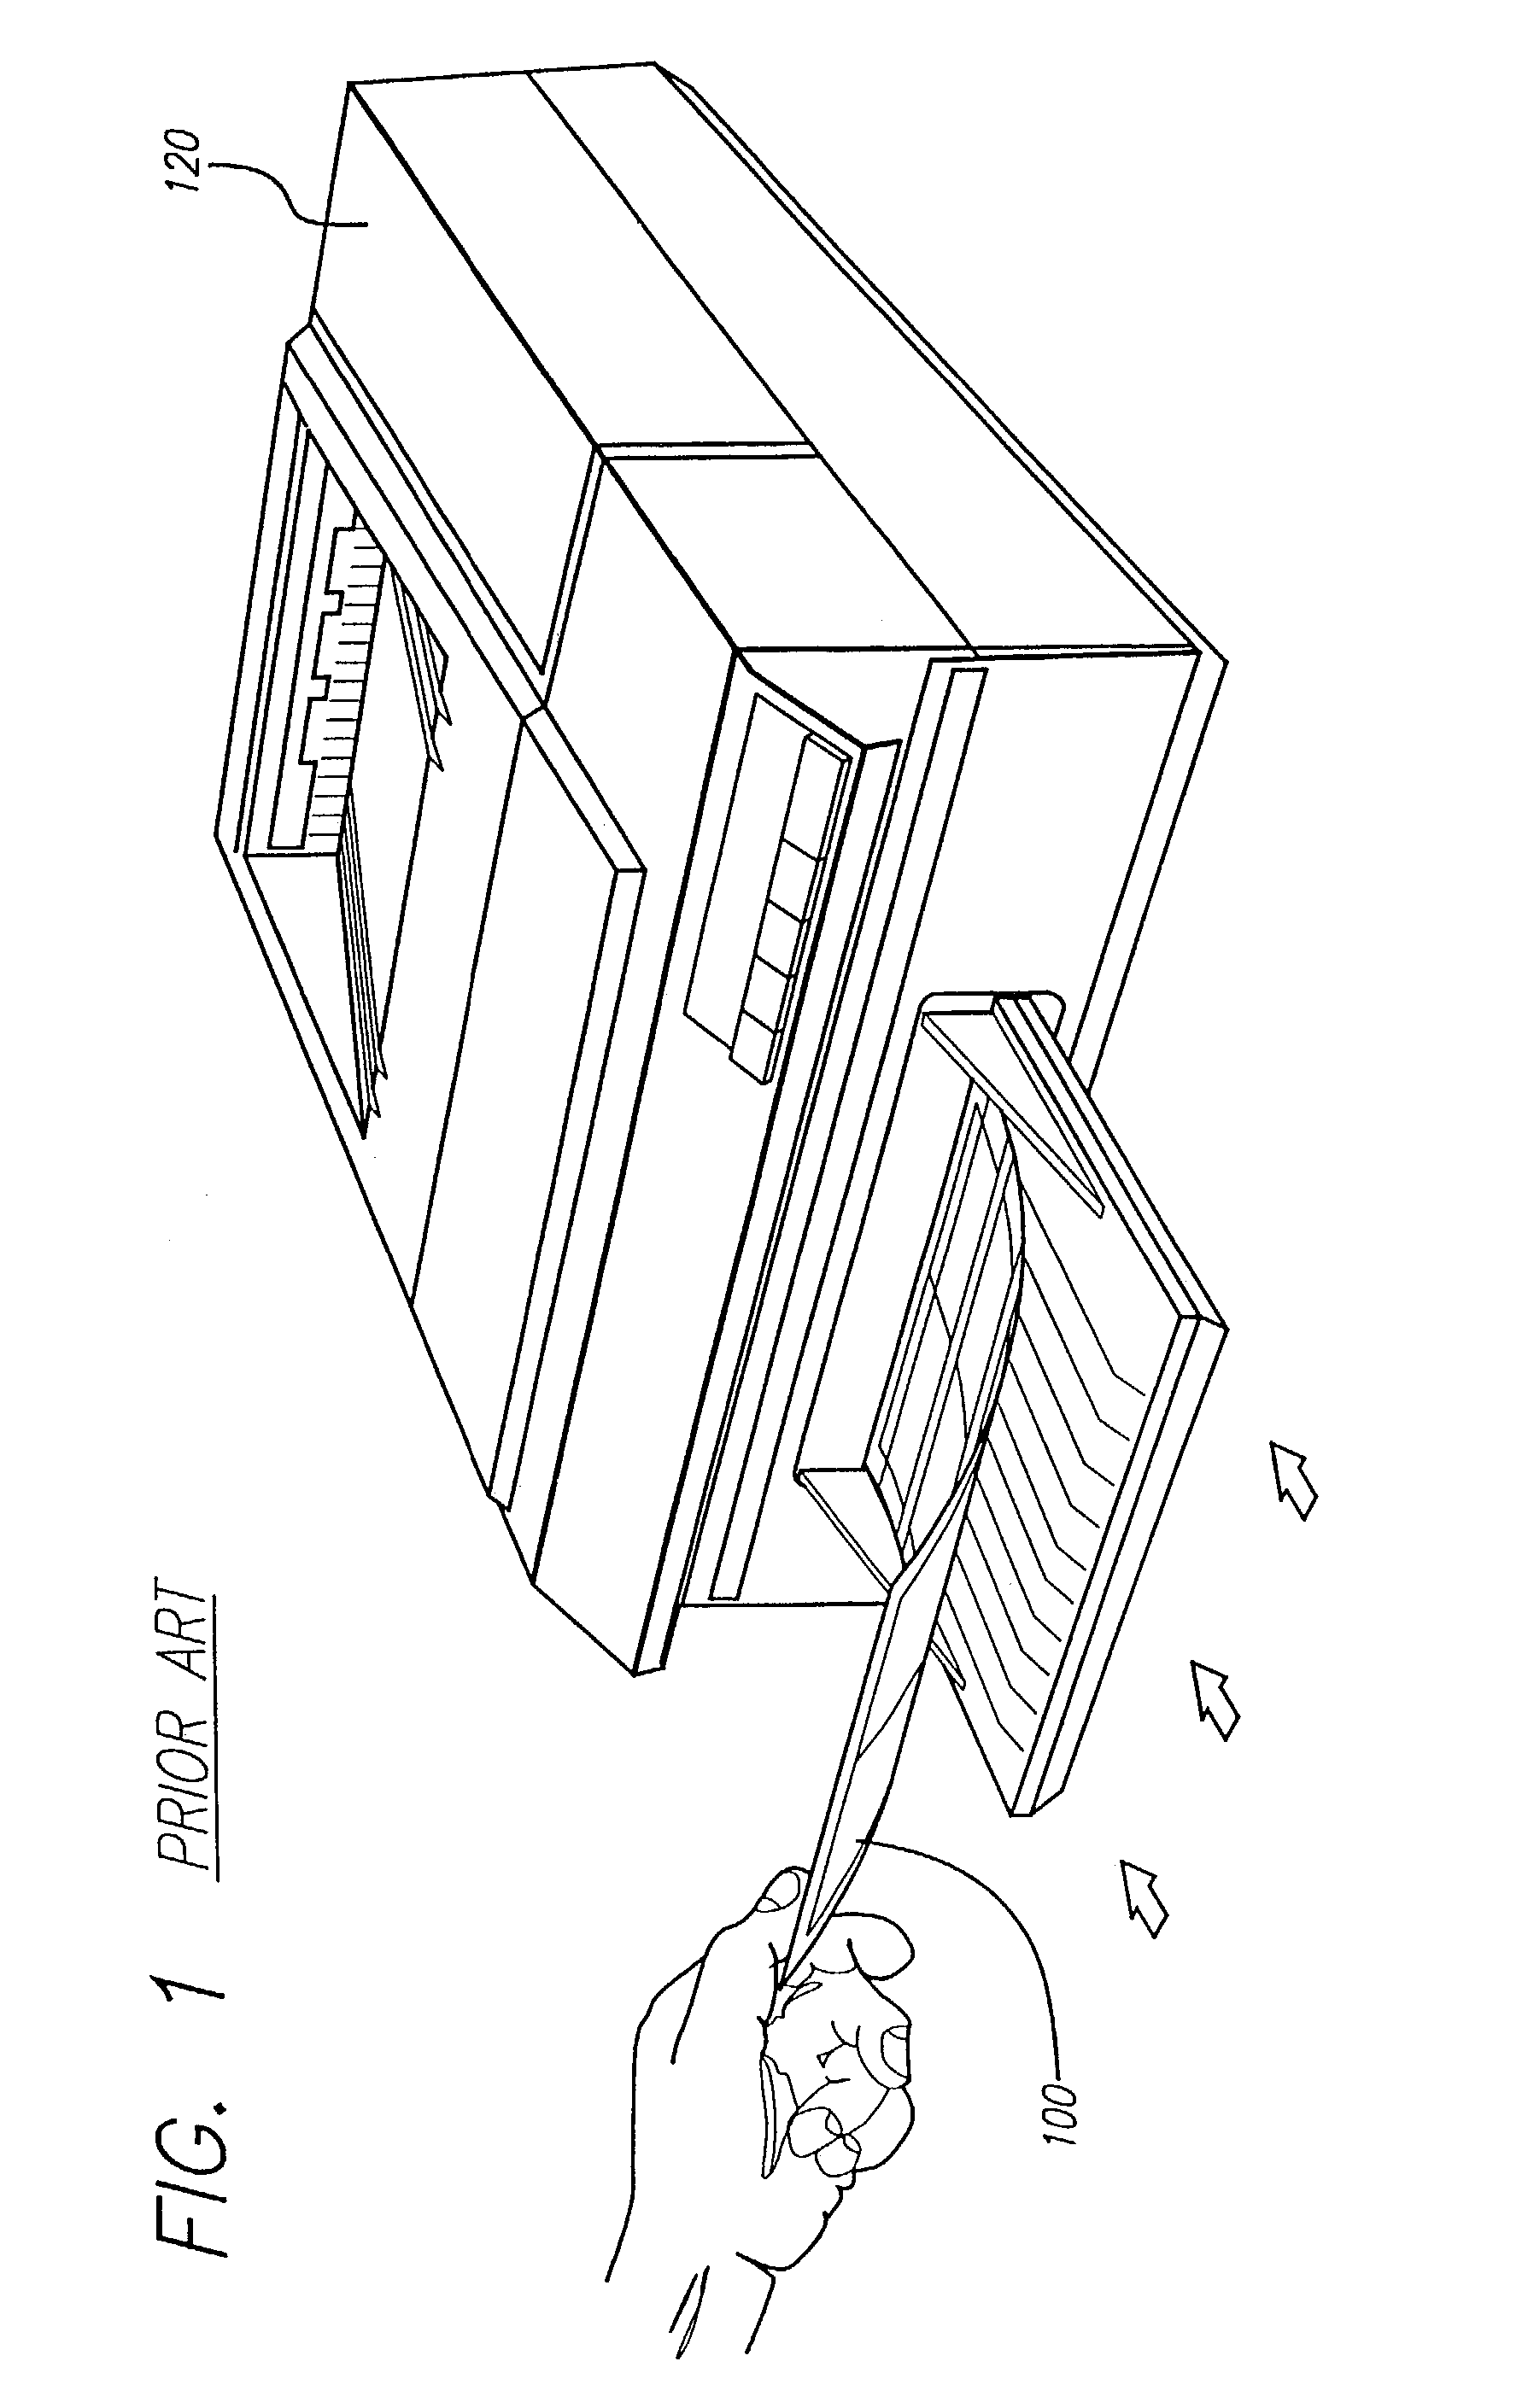 Method of forming a sheet of printable media